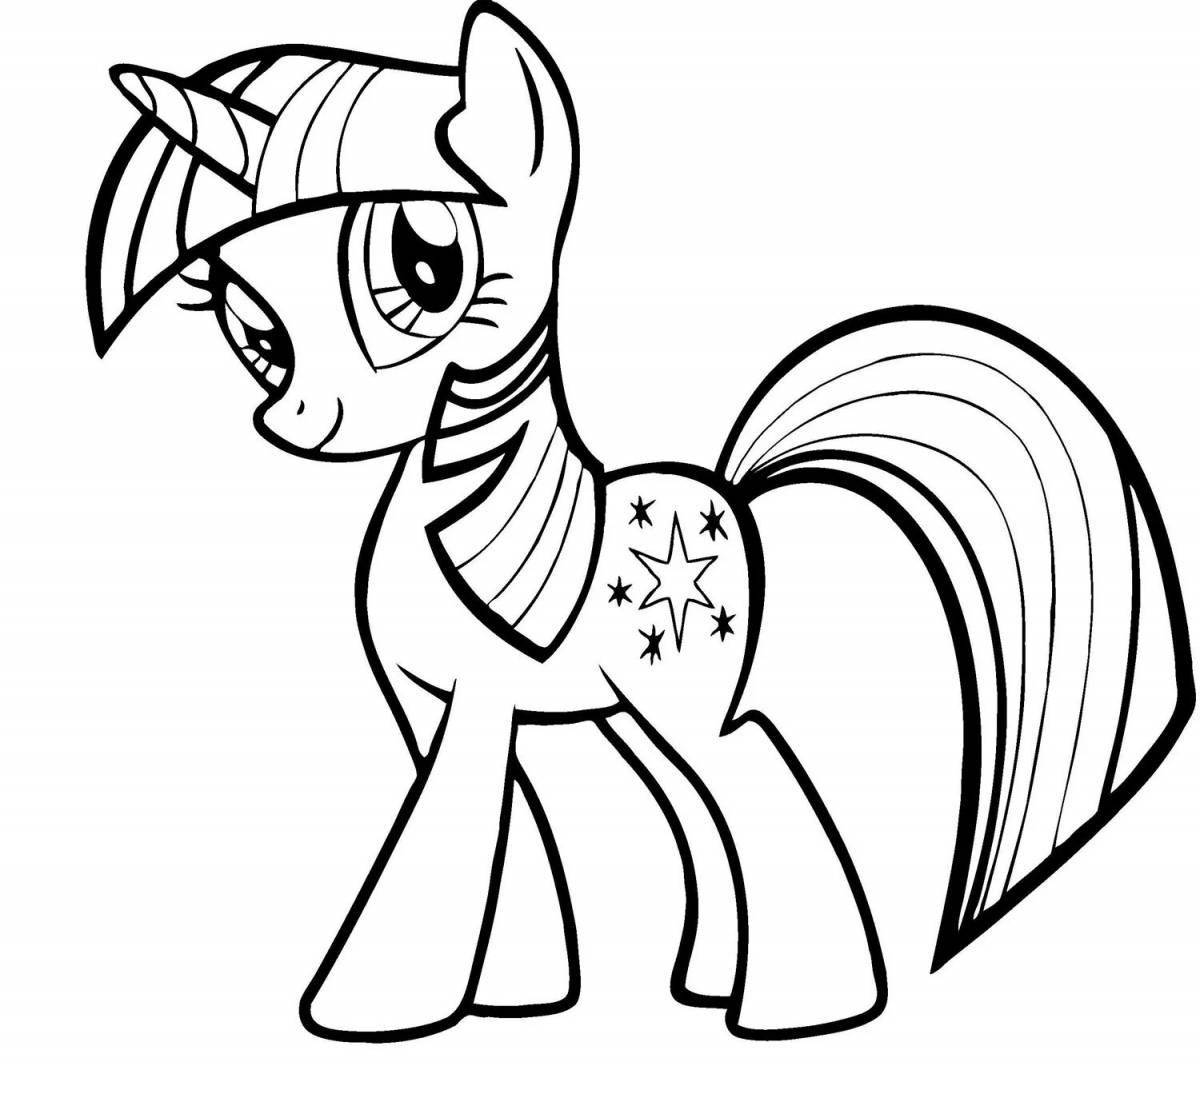 Playful my little pony coloring page apk